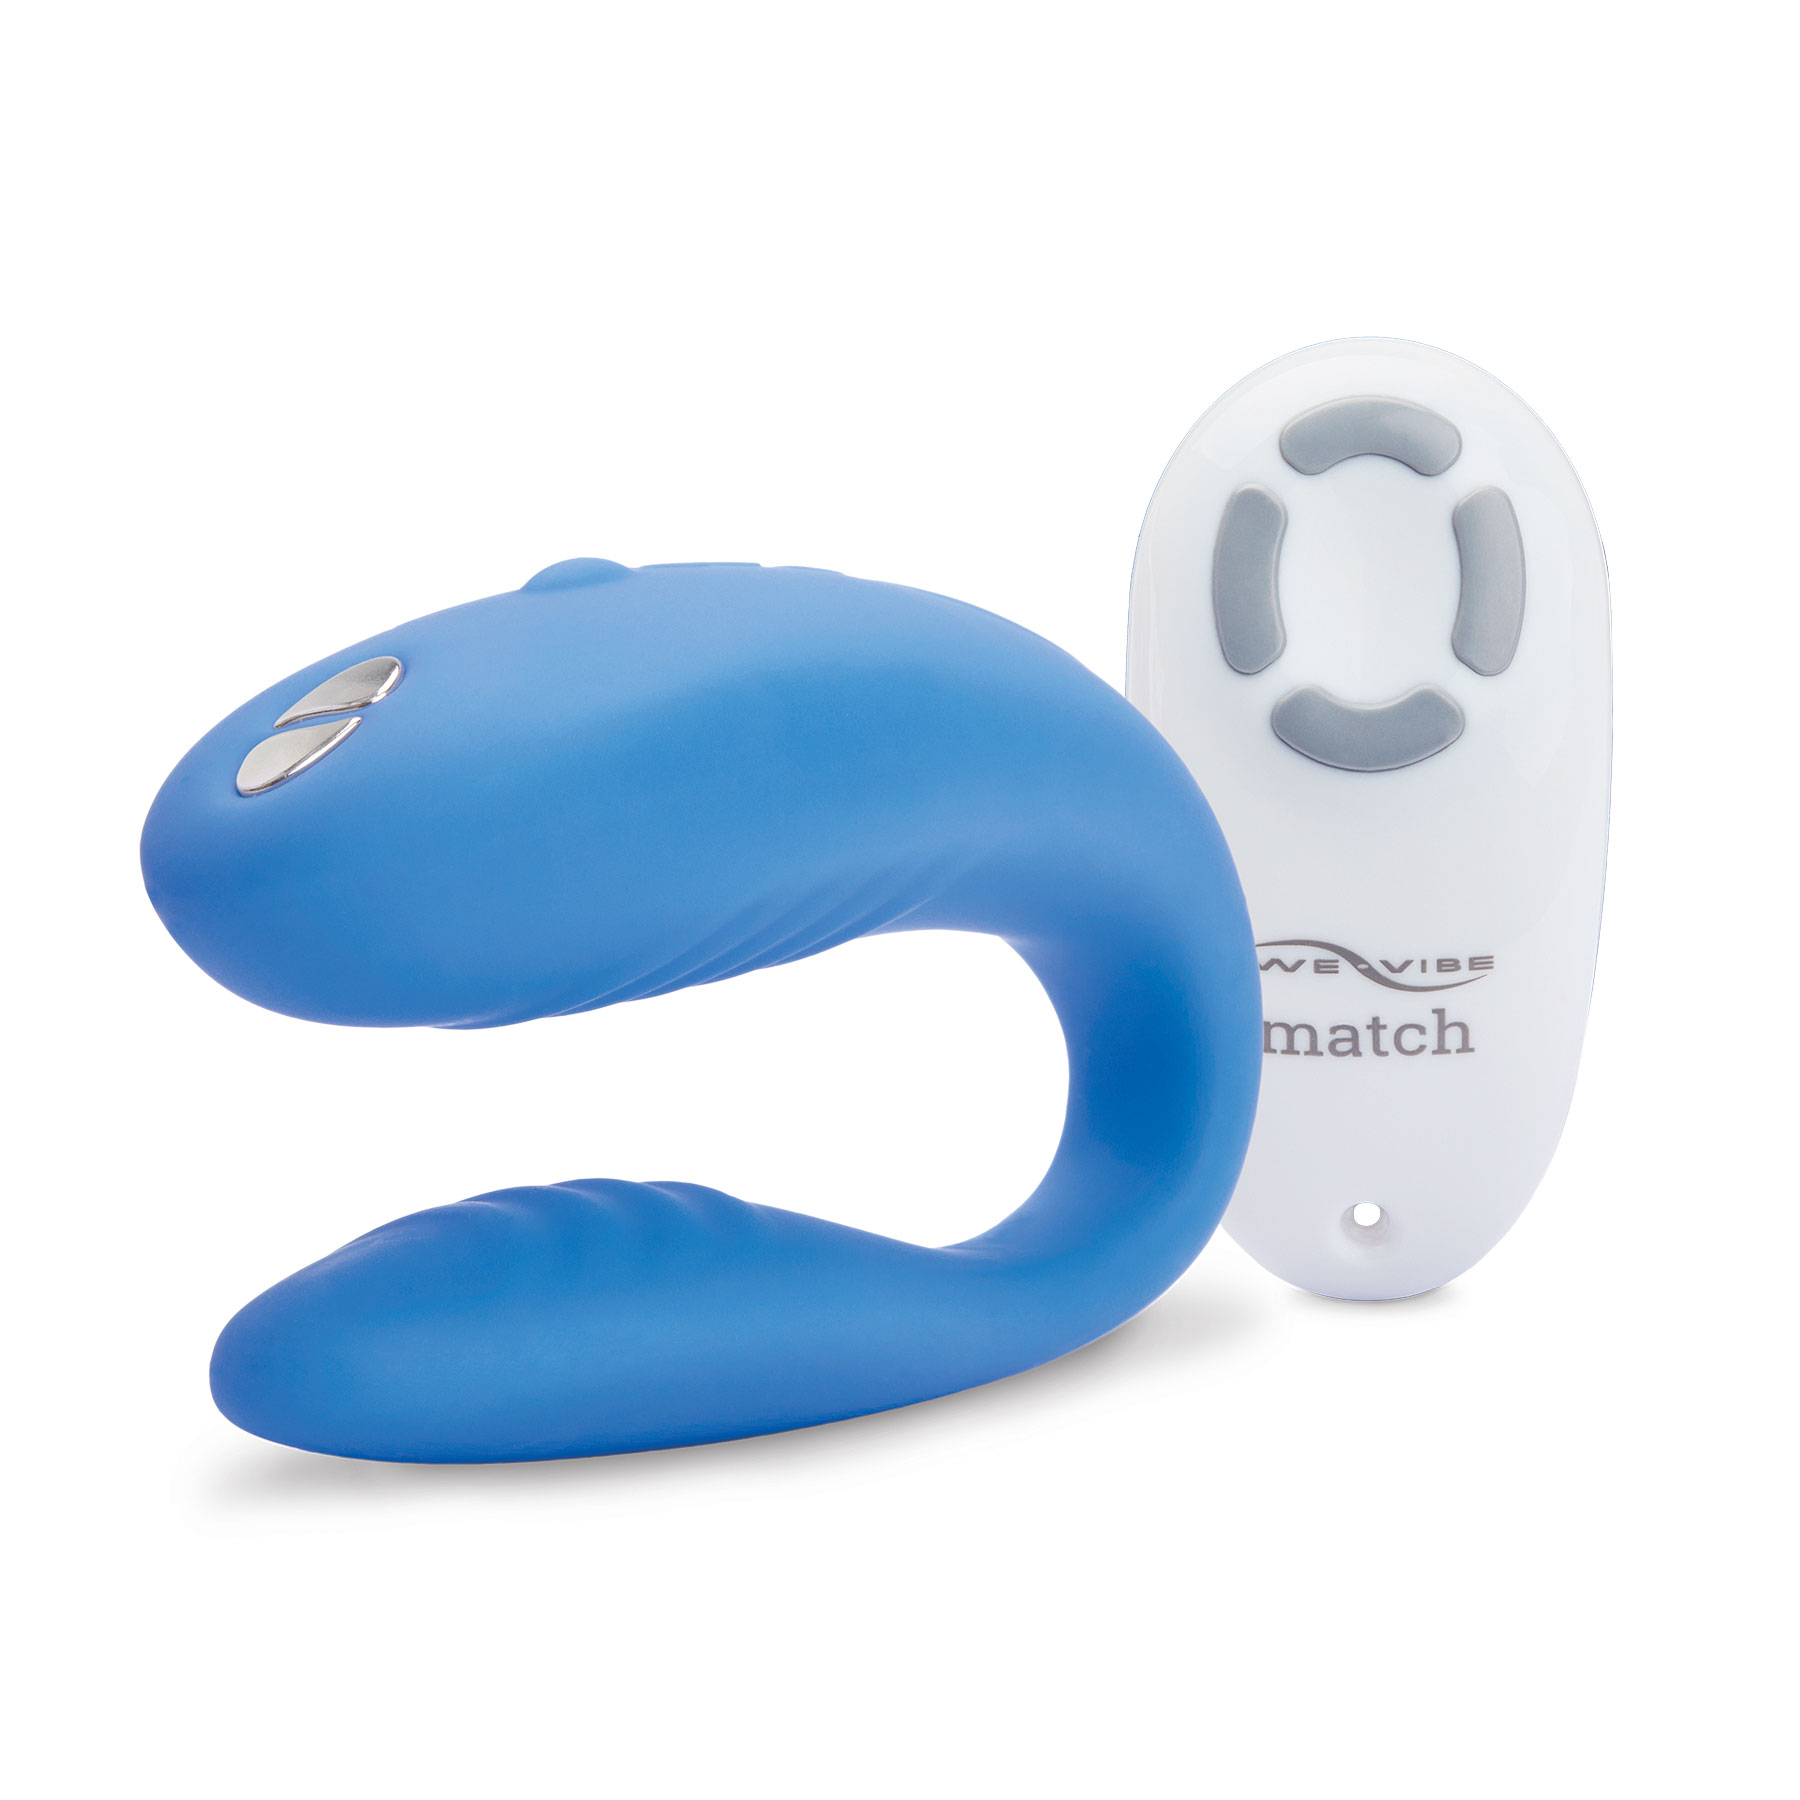 We-Vibe Match Couples Massager picture pic